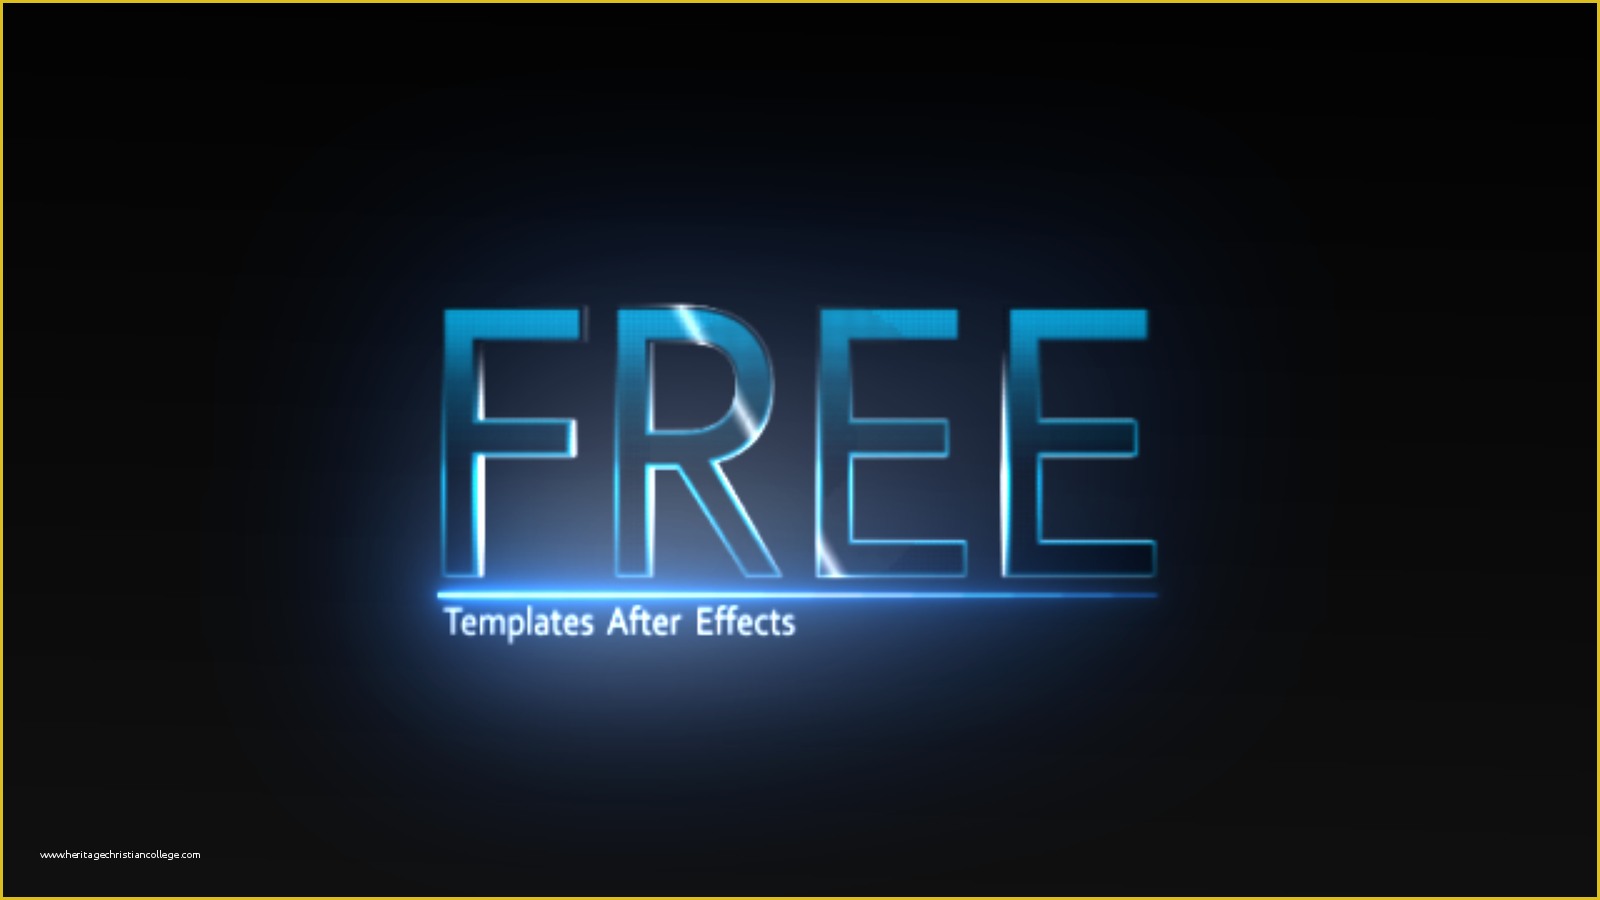 Free Ae Templates Of Free Templates after Effects